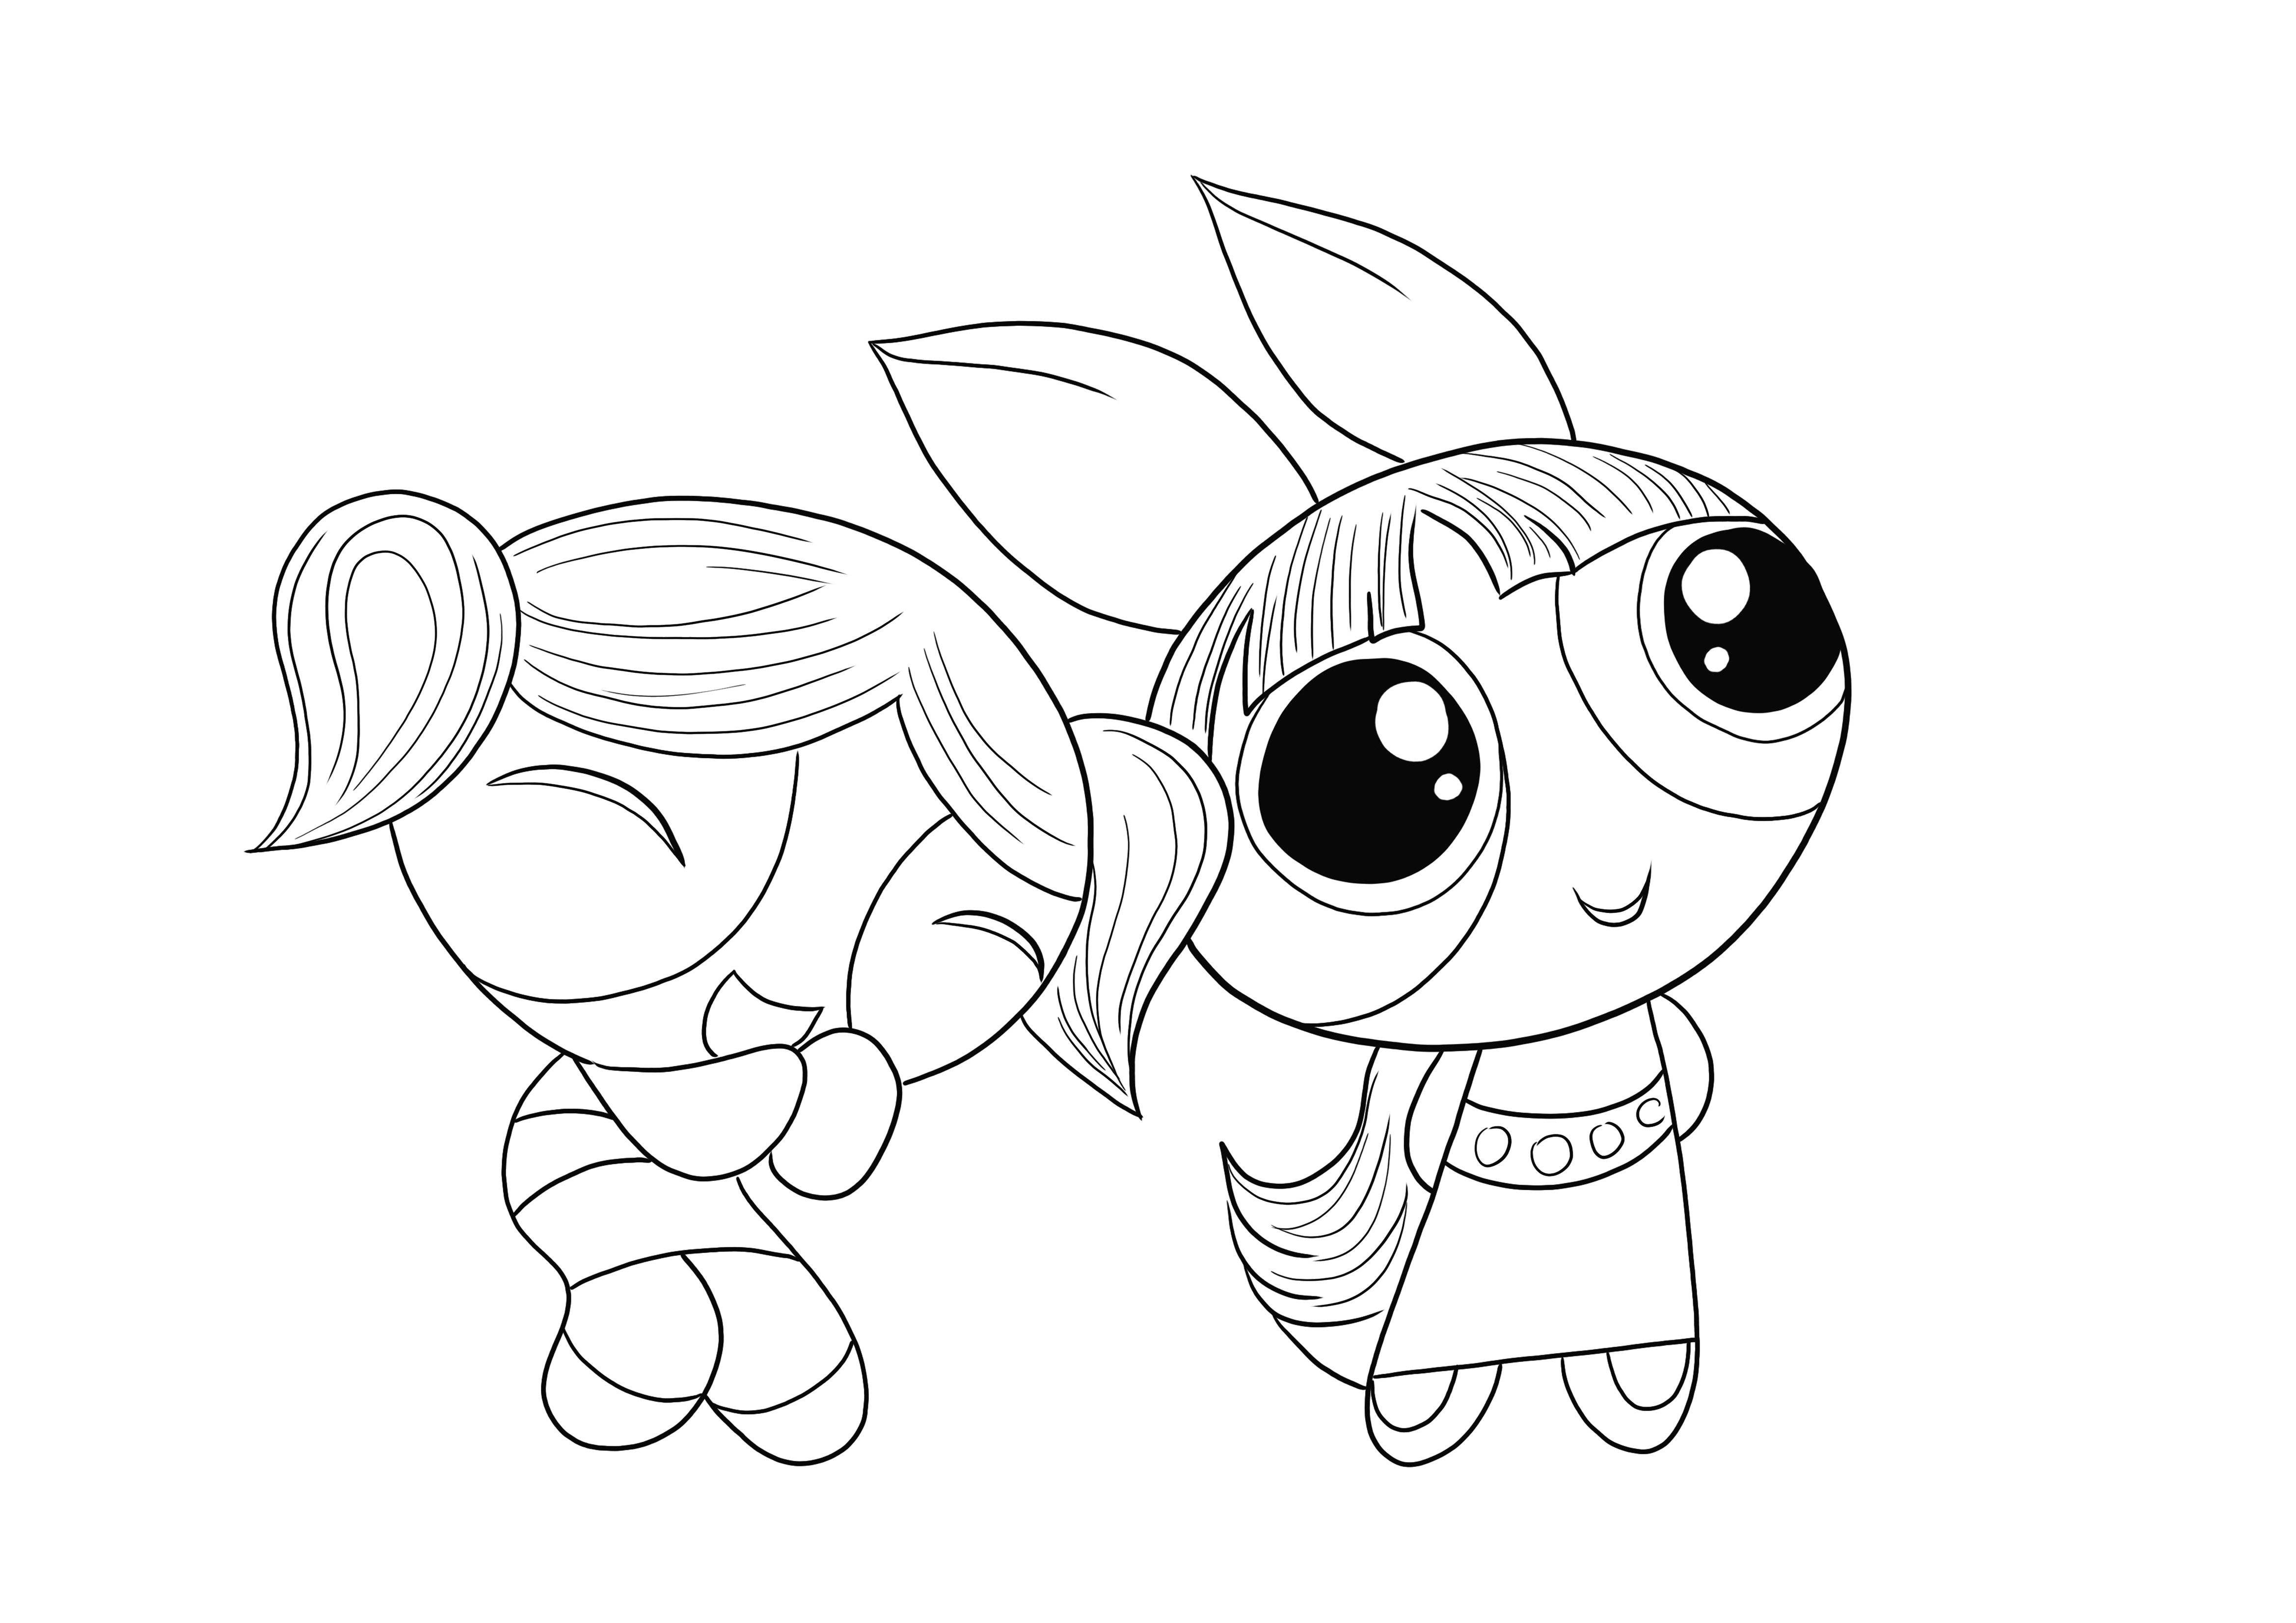 Powerpuff Girls giggling and laughing to print and color for free image